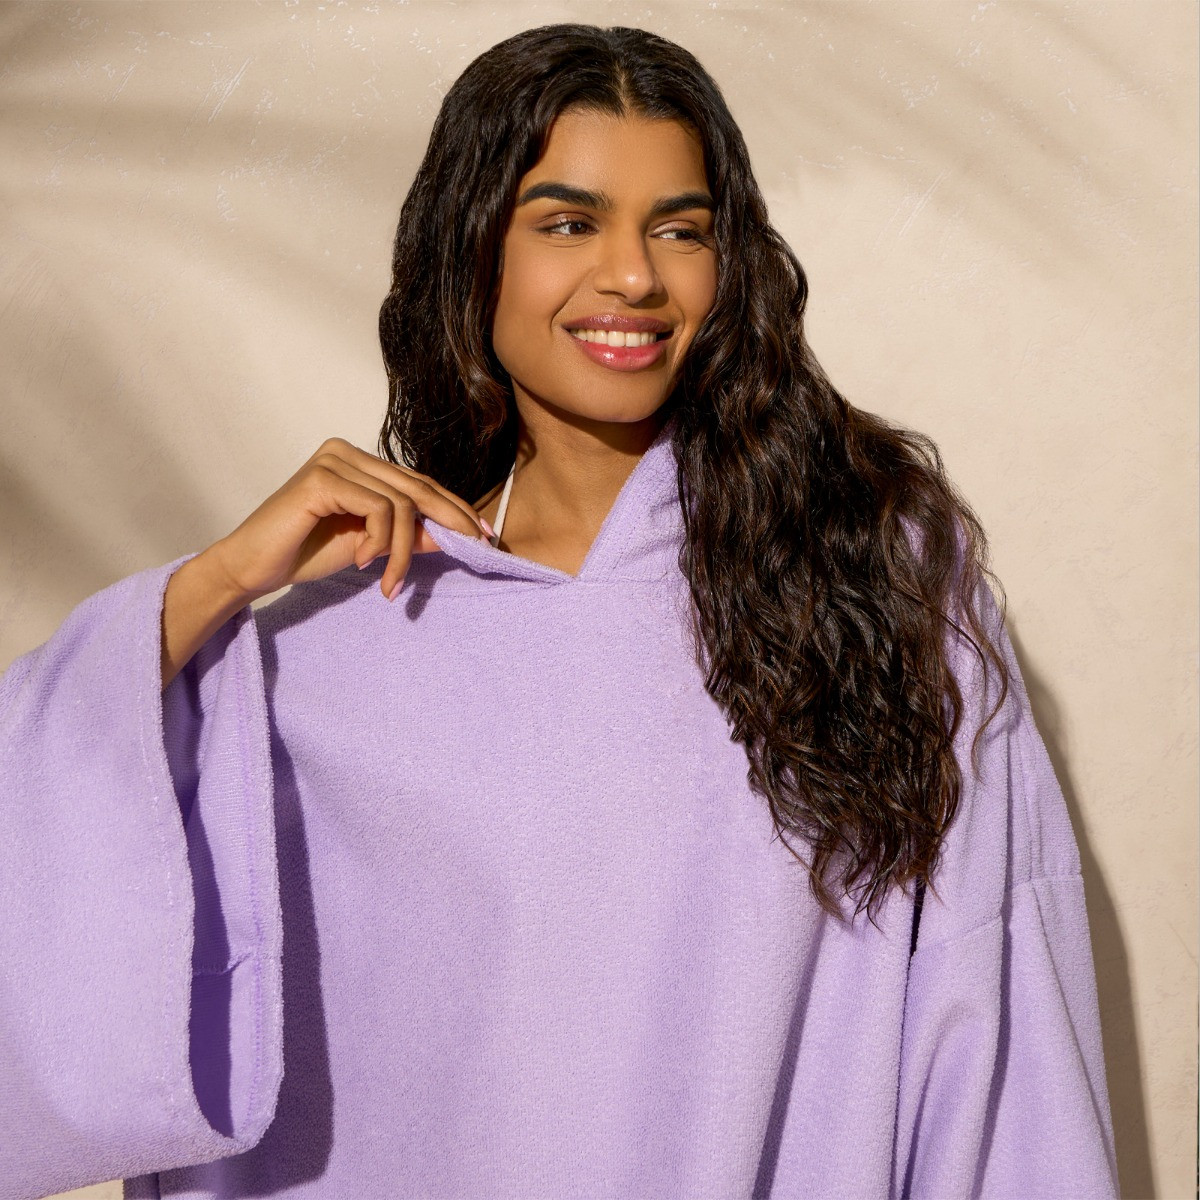 OHS Adult Towel Poncho - Lilac>